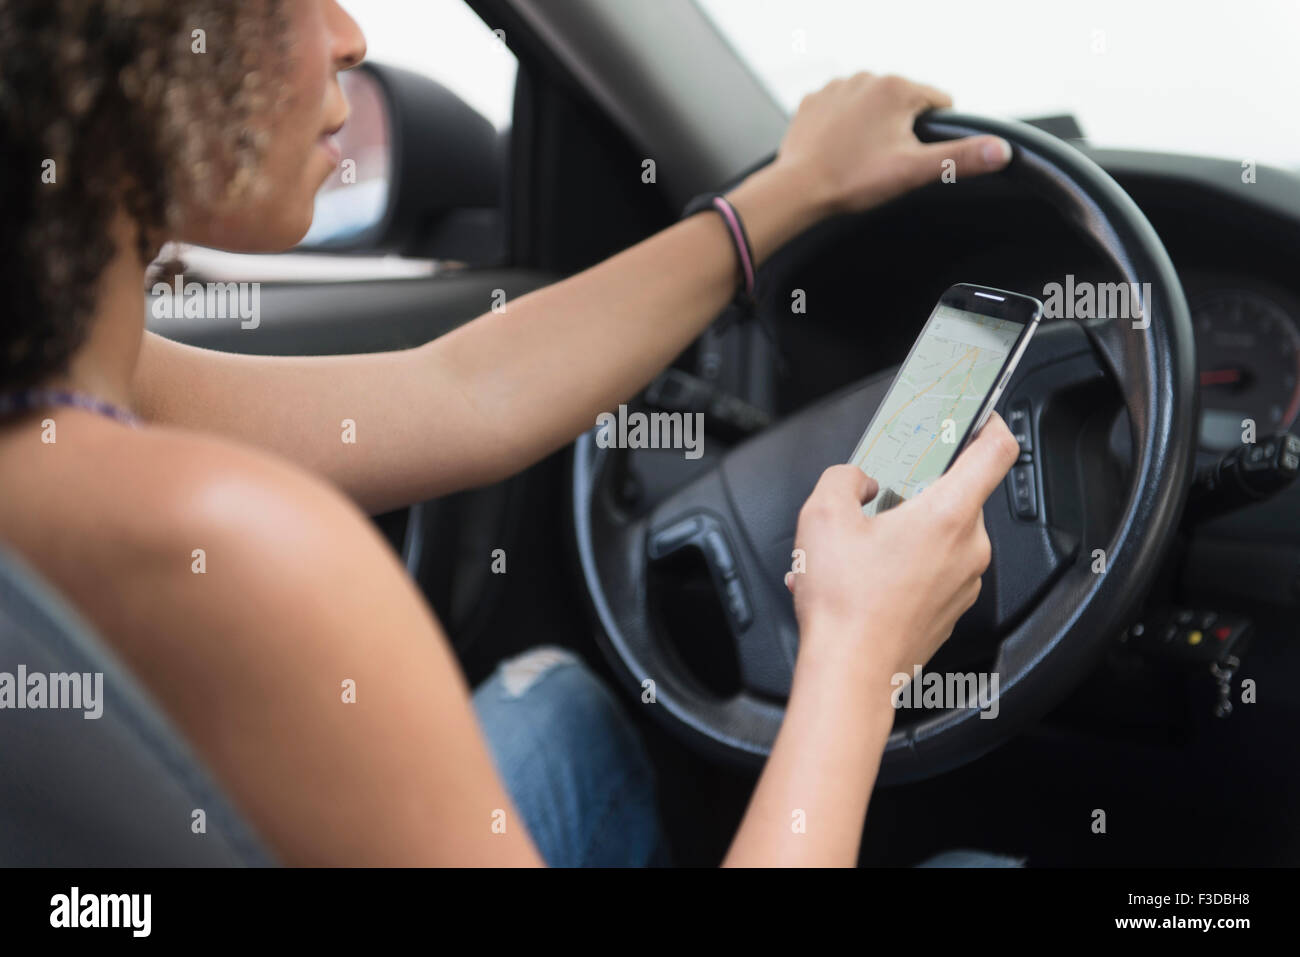 Young woman texting while driving car Stock Photo